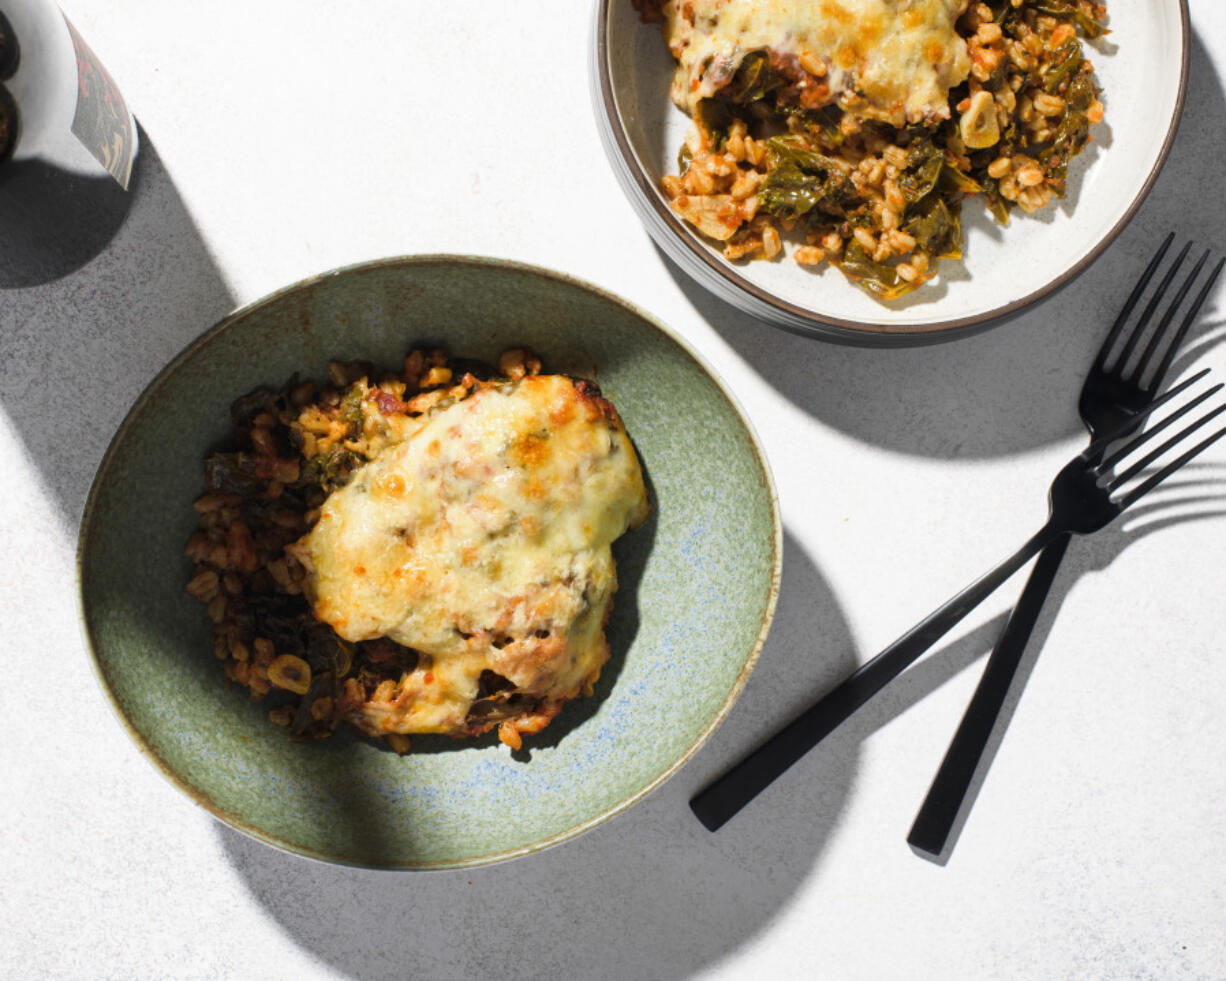 This image released by Milk Street shows a recipe for cheese baked farro with kale and tomatoes.